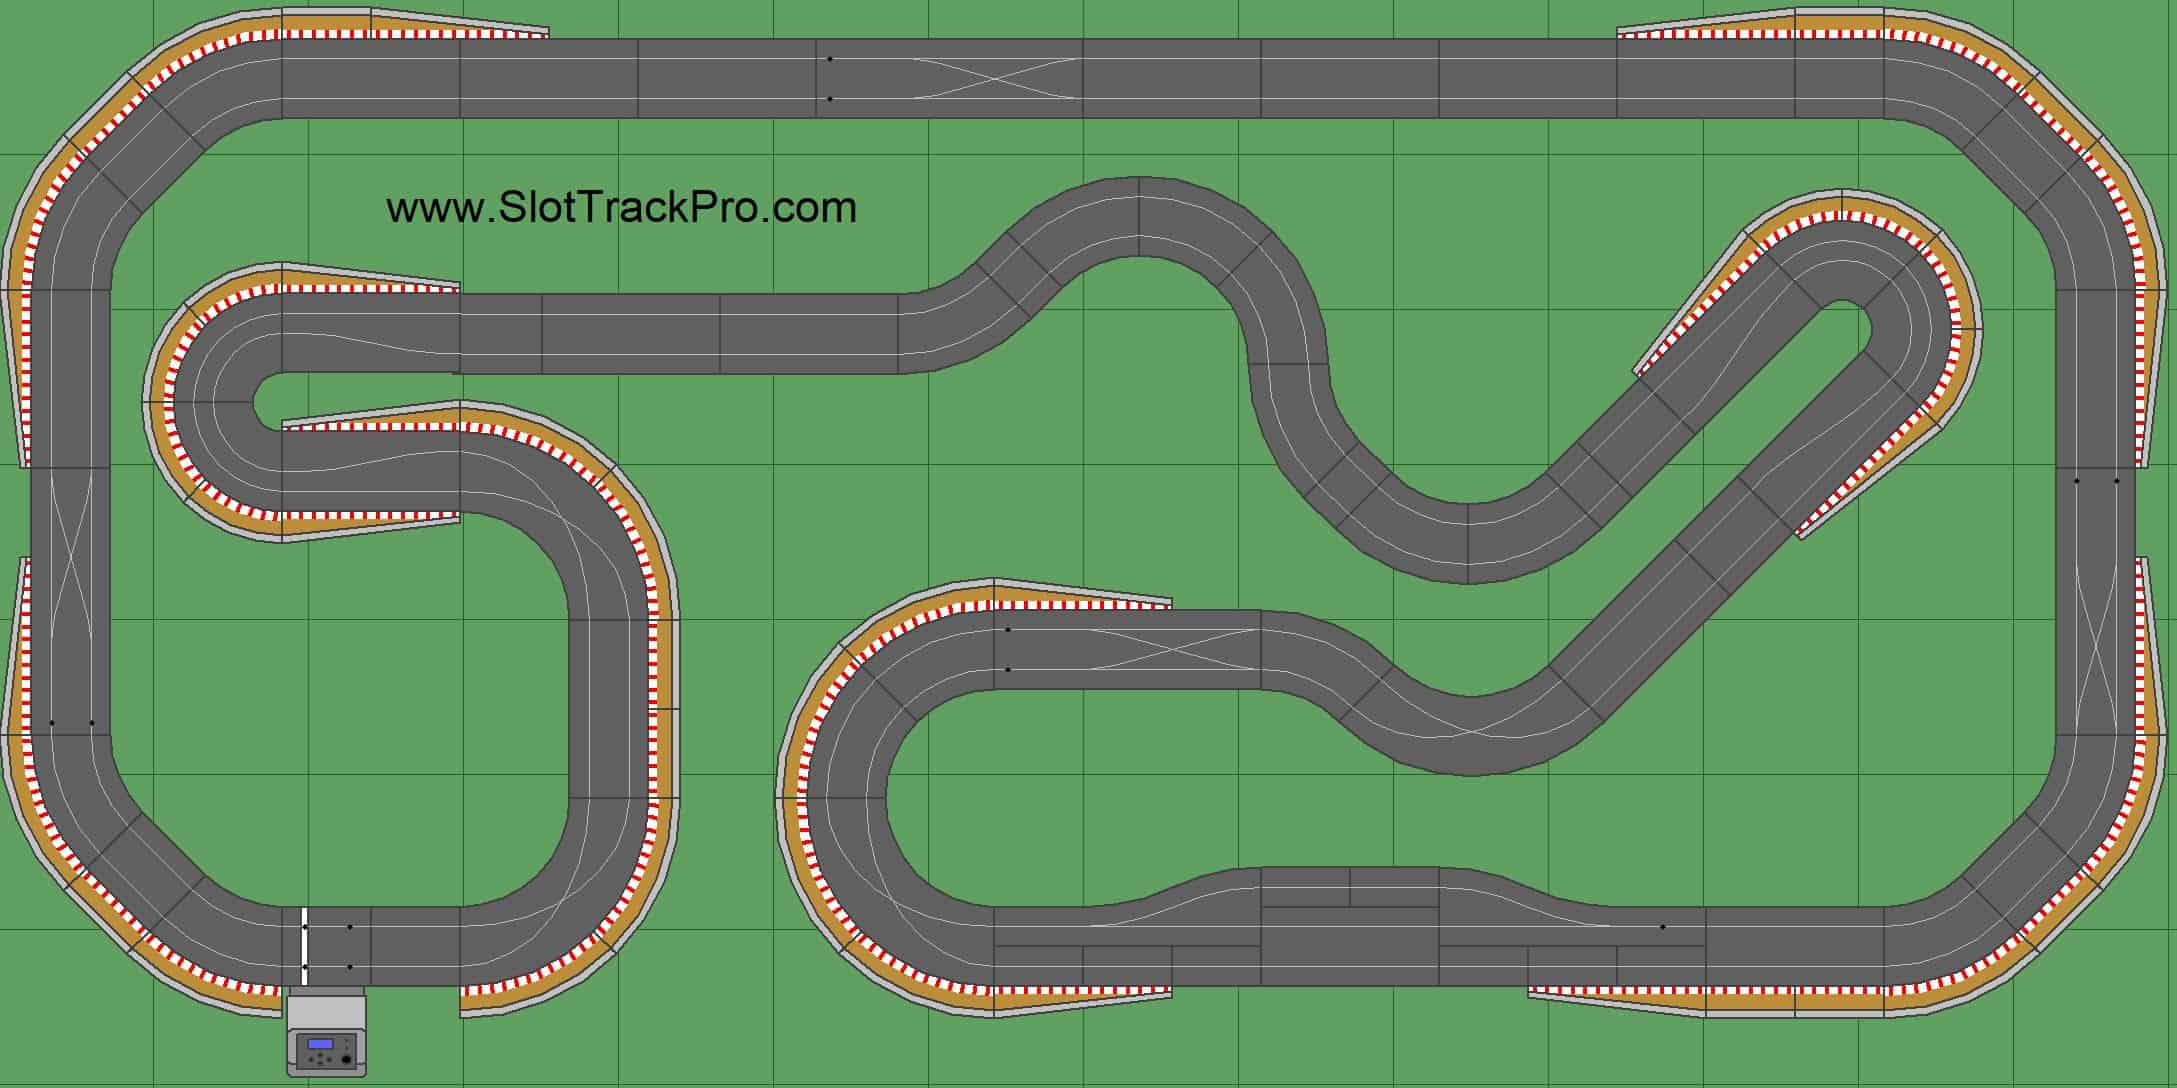 scalextric-track-designs-free-pdf-track-plans-at-slot-track-pro